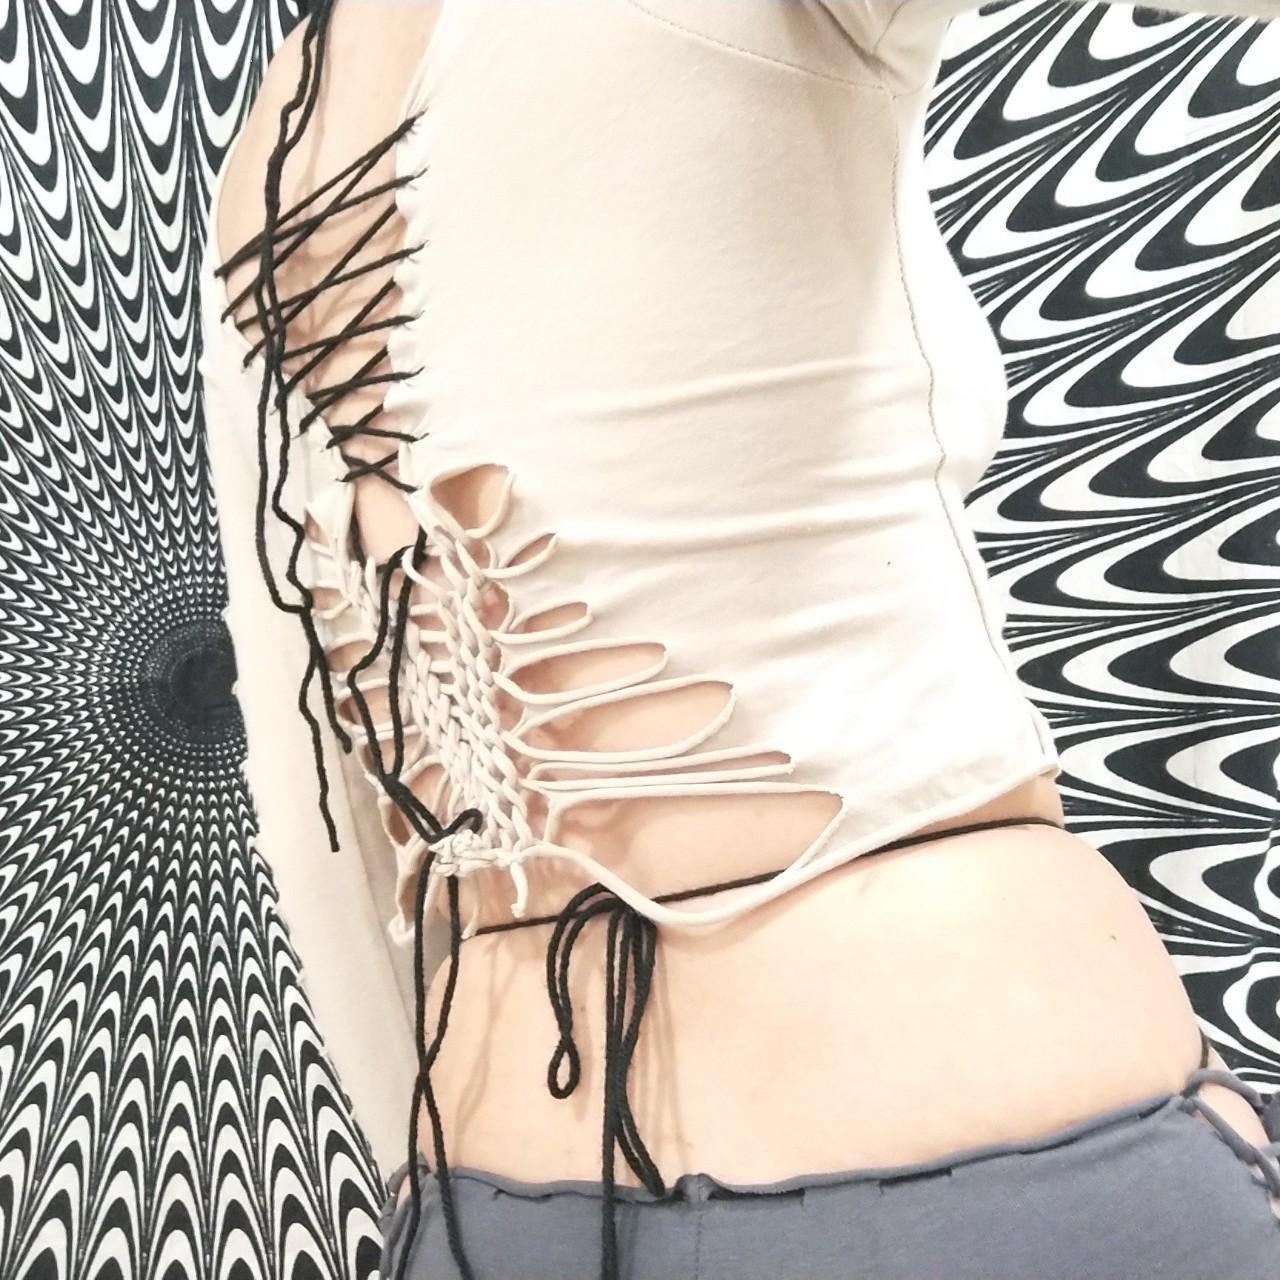 Product Image 2 - Nude braided lace up top

Fits